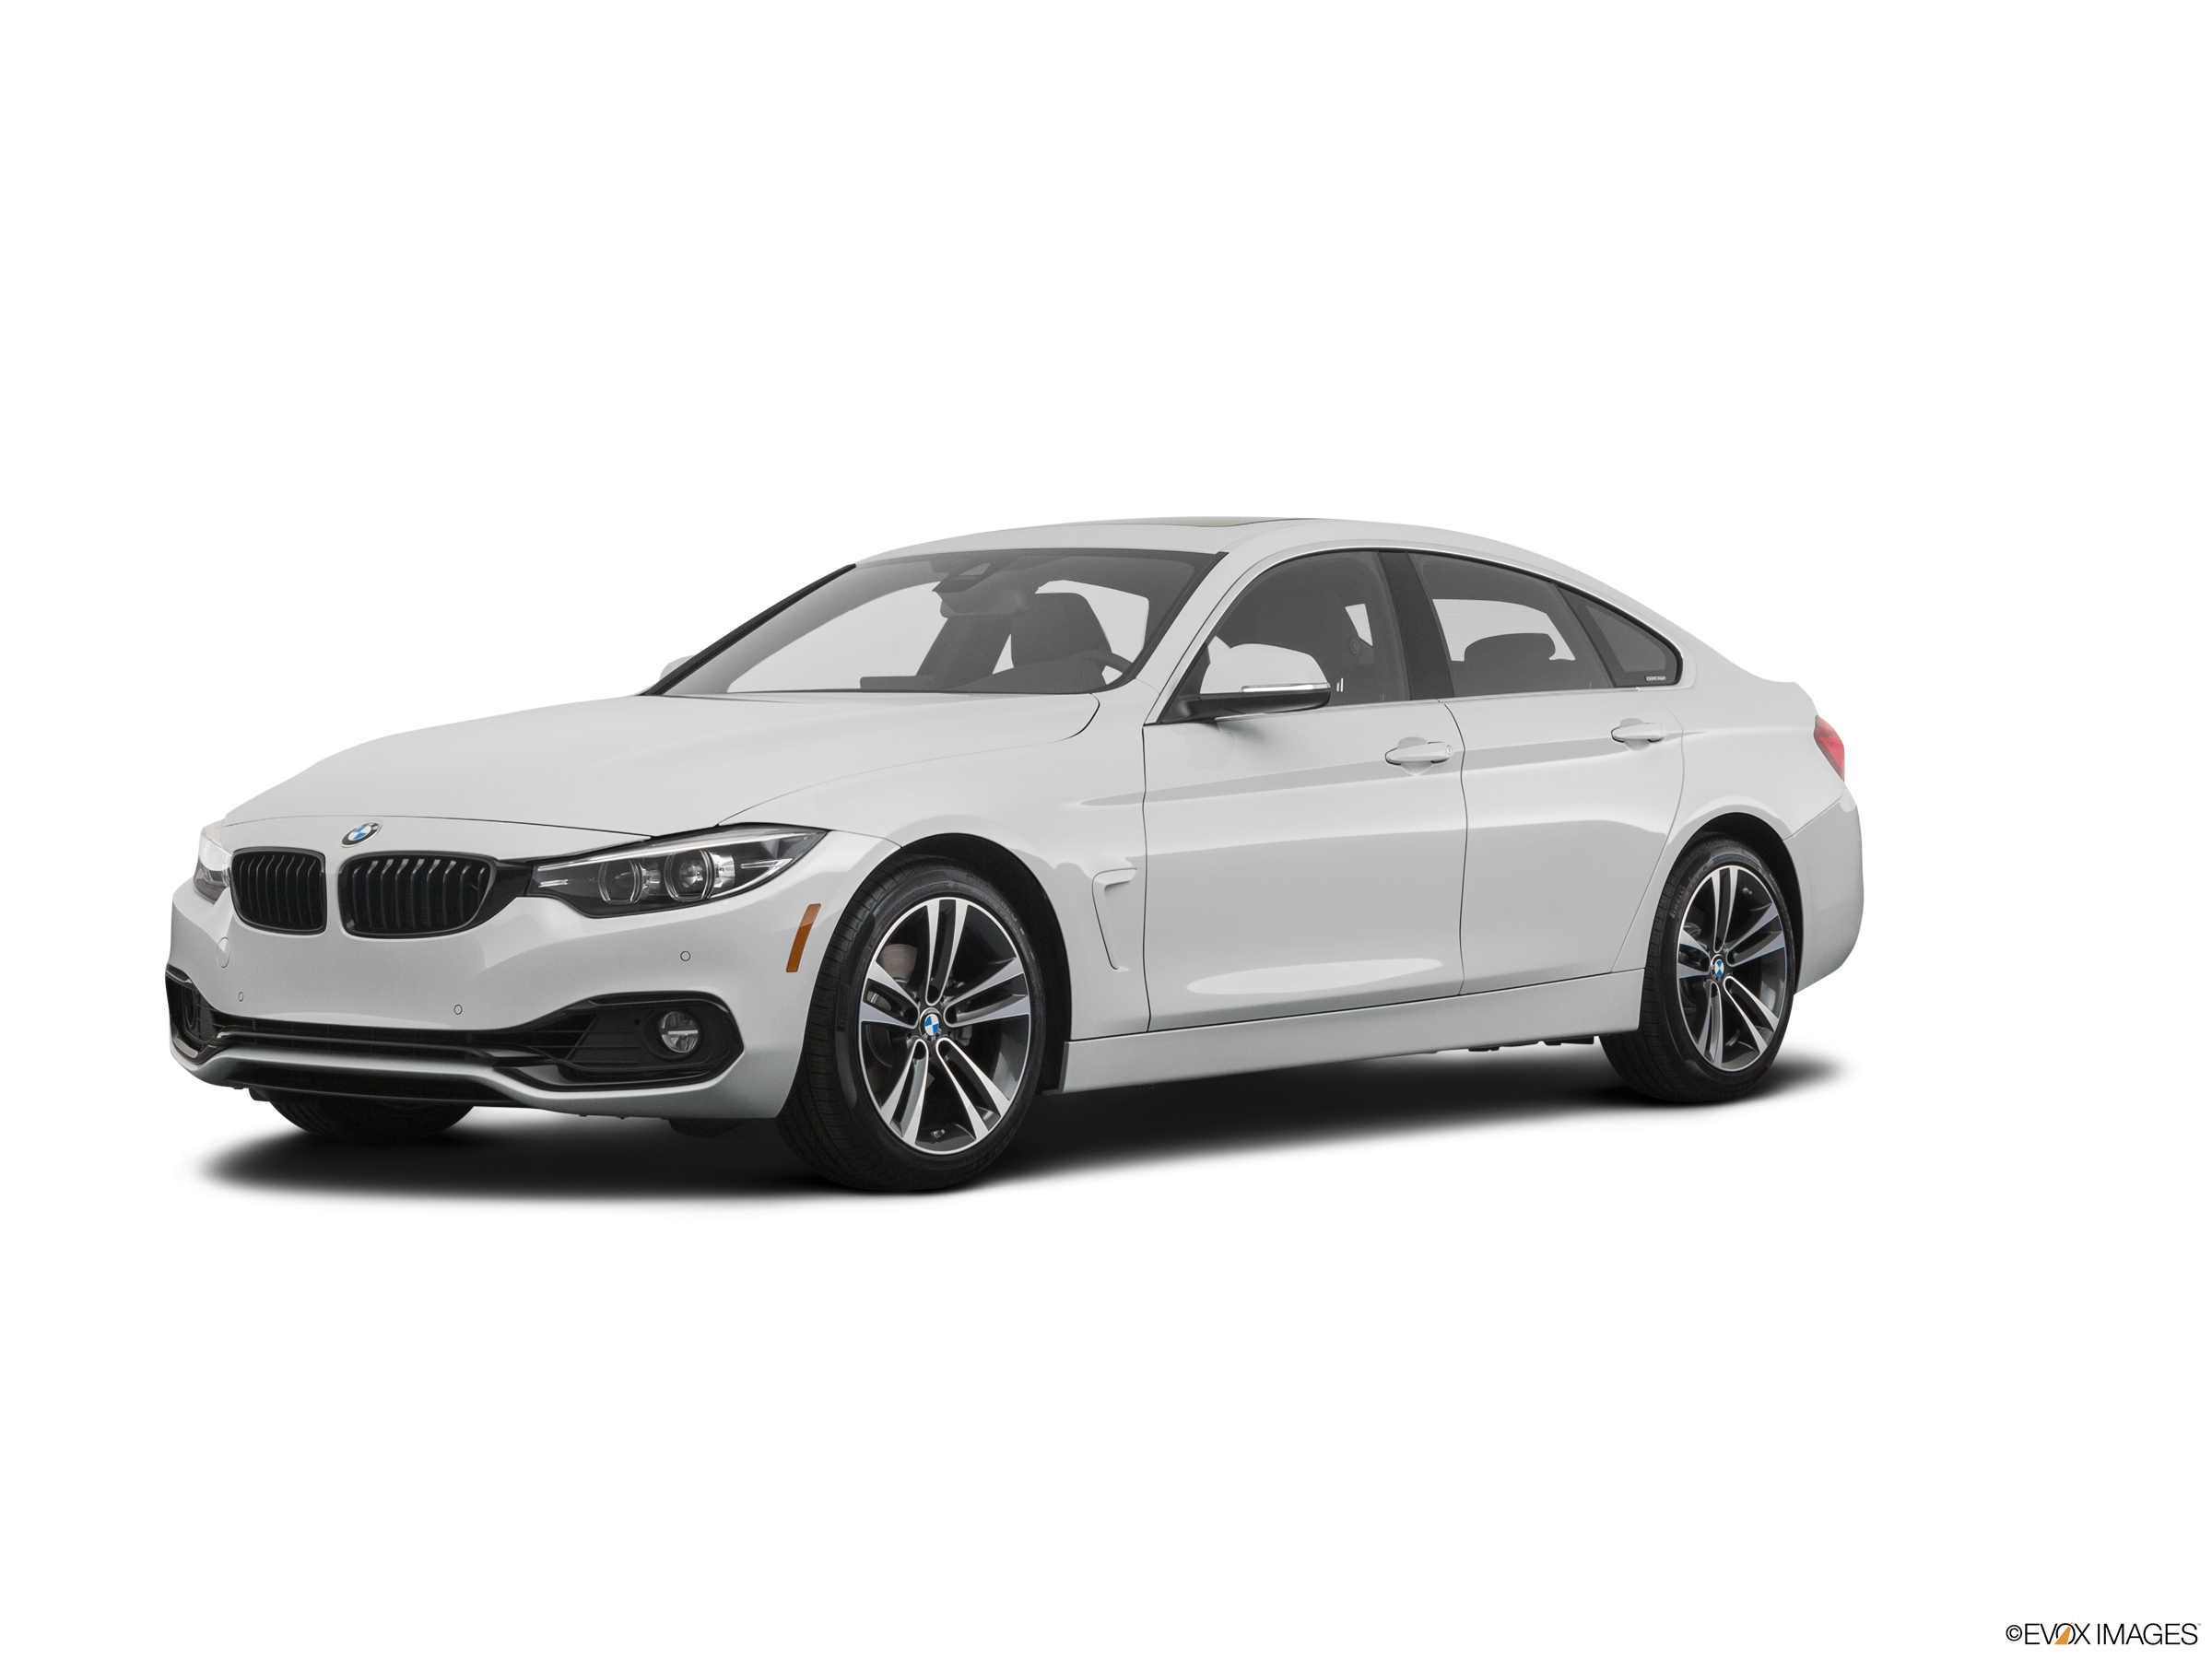 https://file.kelleybluebookimages.com/kbb/base/evox/CP/13781/2020-BMW-4%20Series-front_13781_032_2400x1800_A96.png